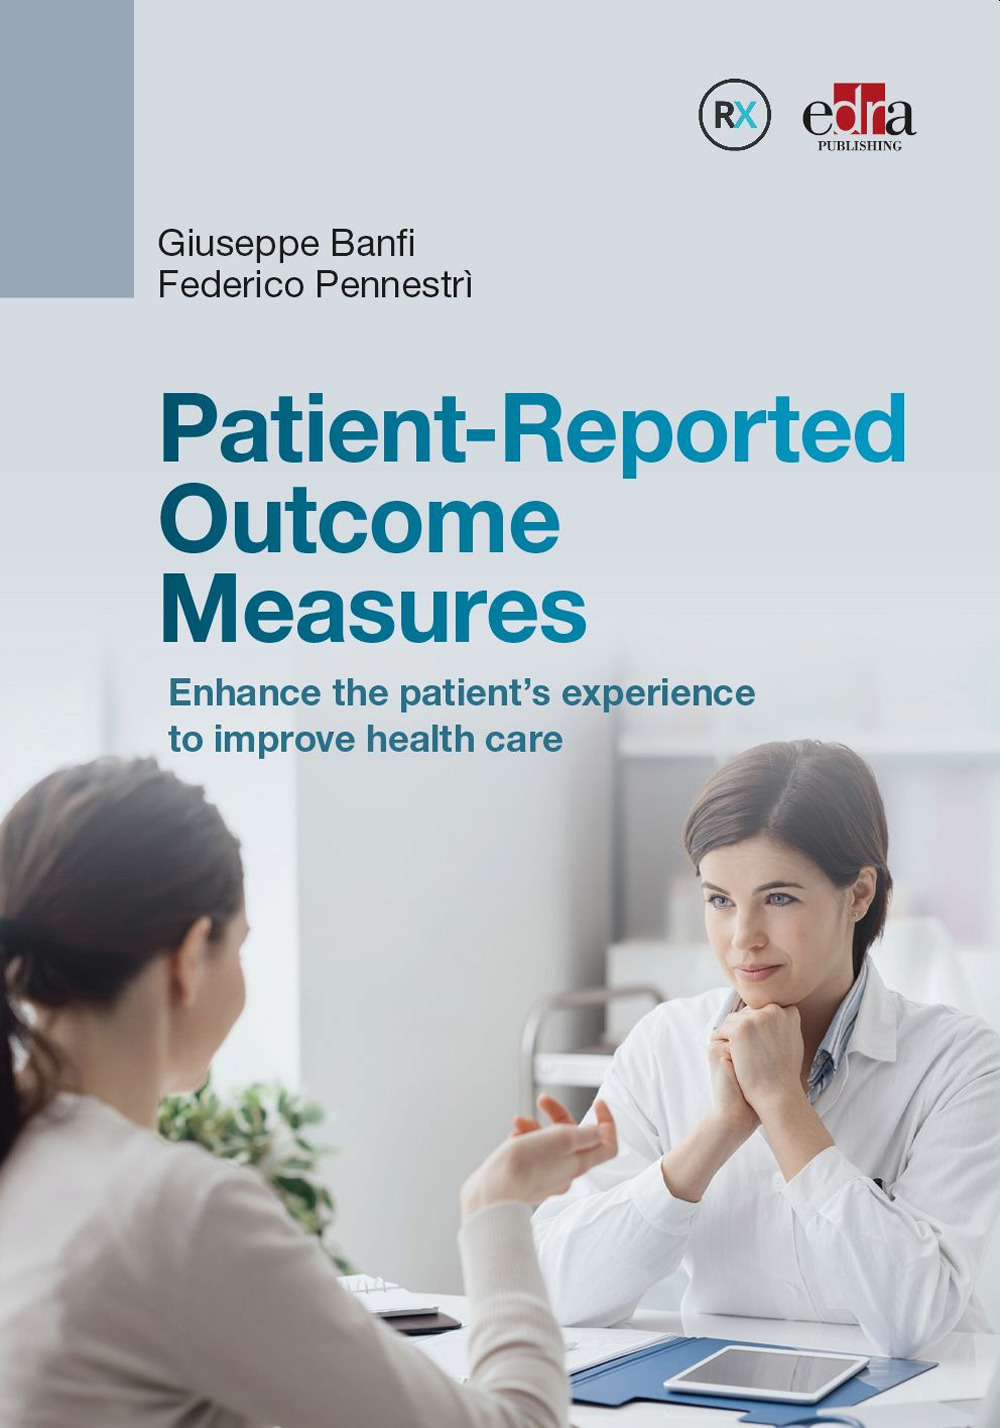 Patient-Reported Outcome Measures. Enhance the patient's experience to improve health care